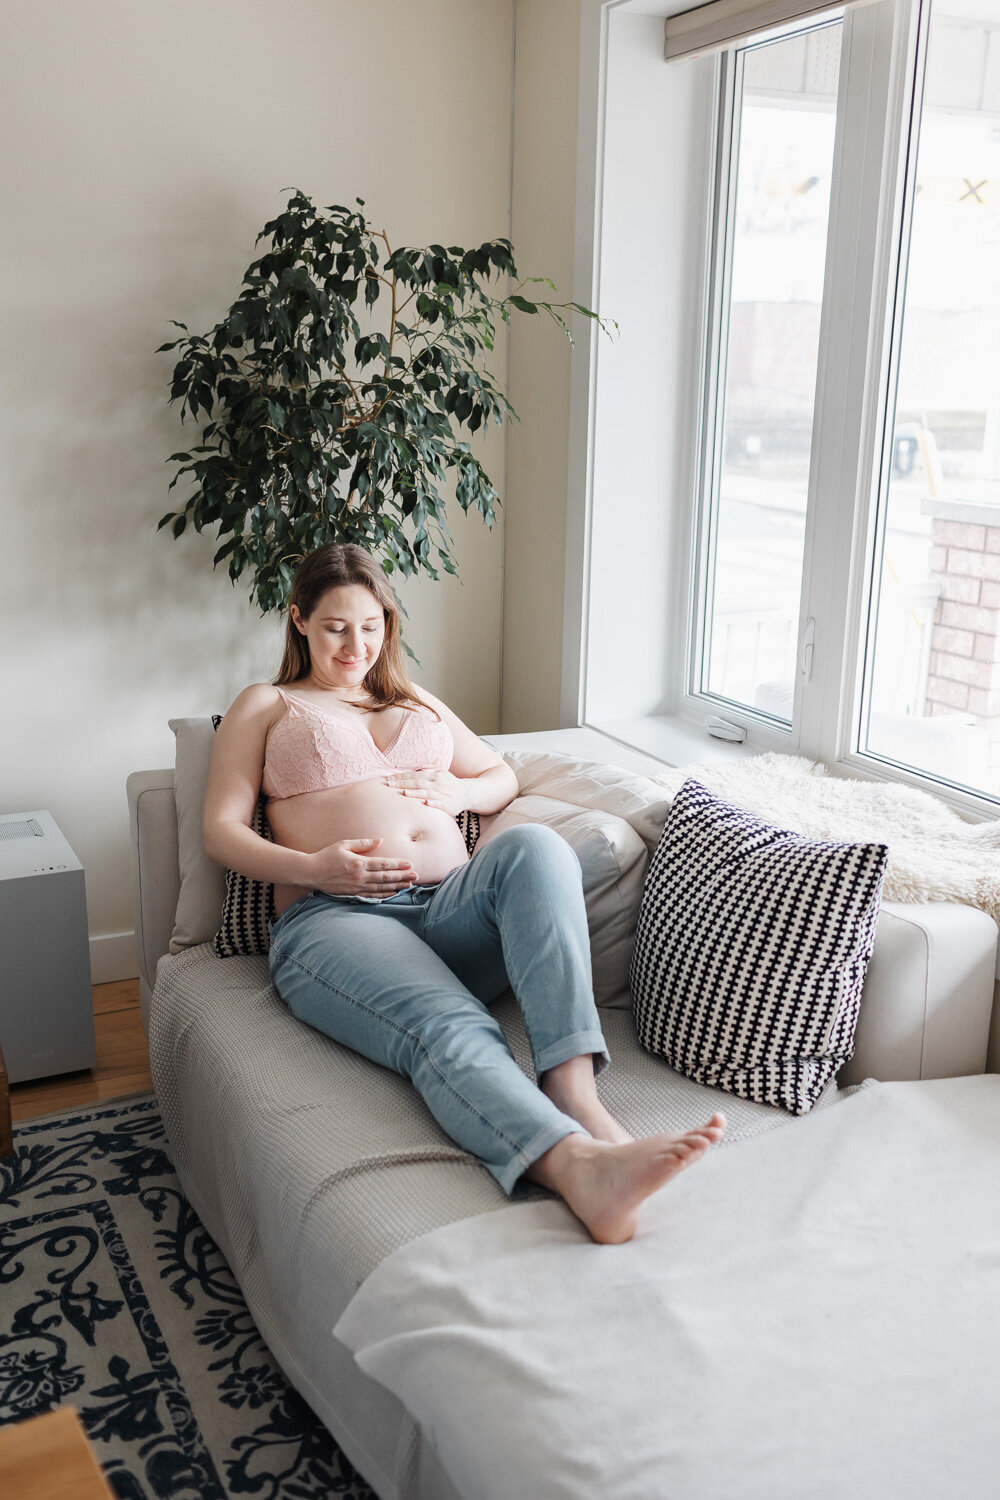 Pregnant woman lounging on couch